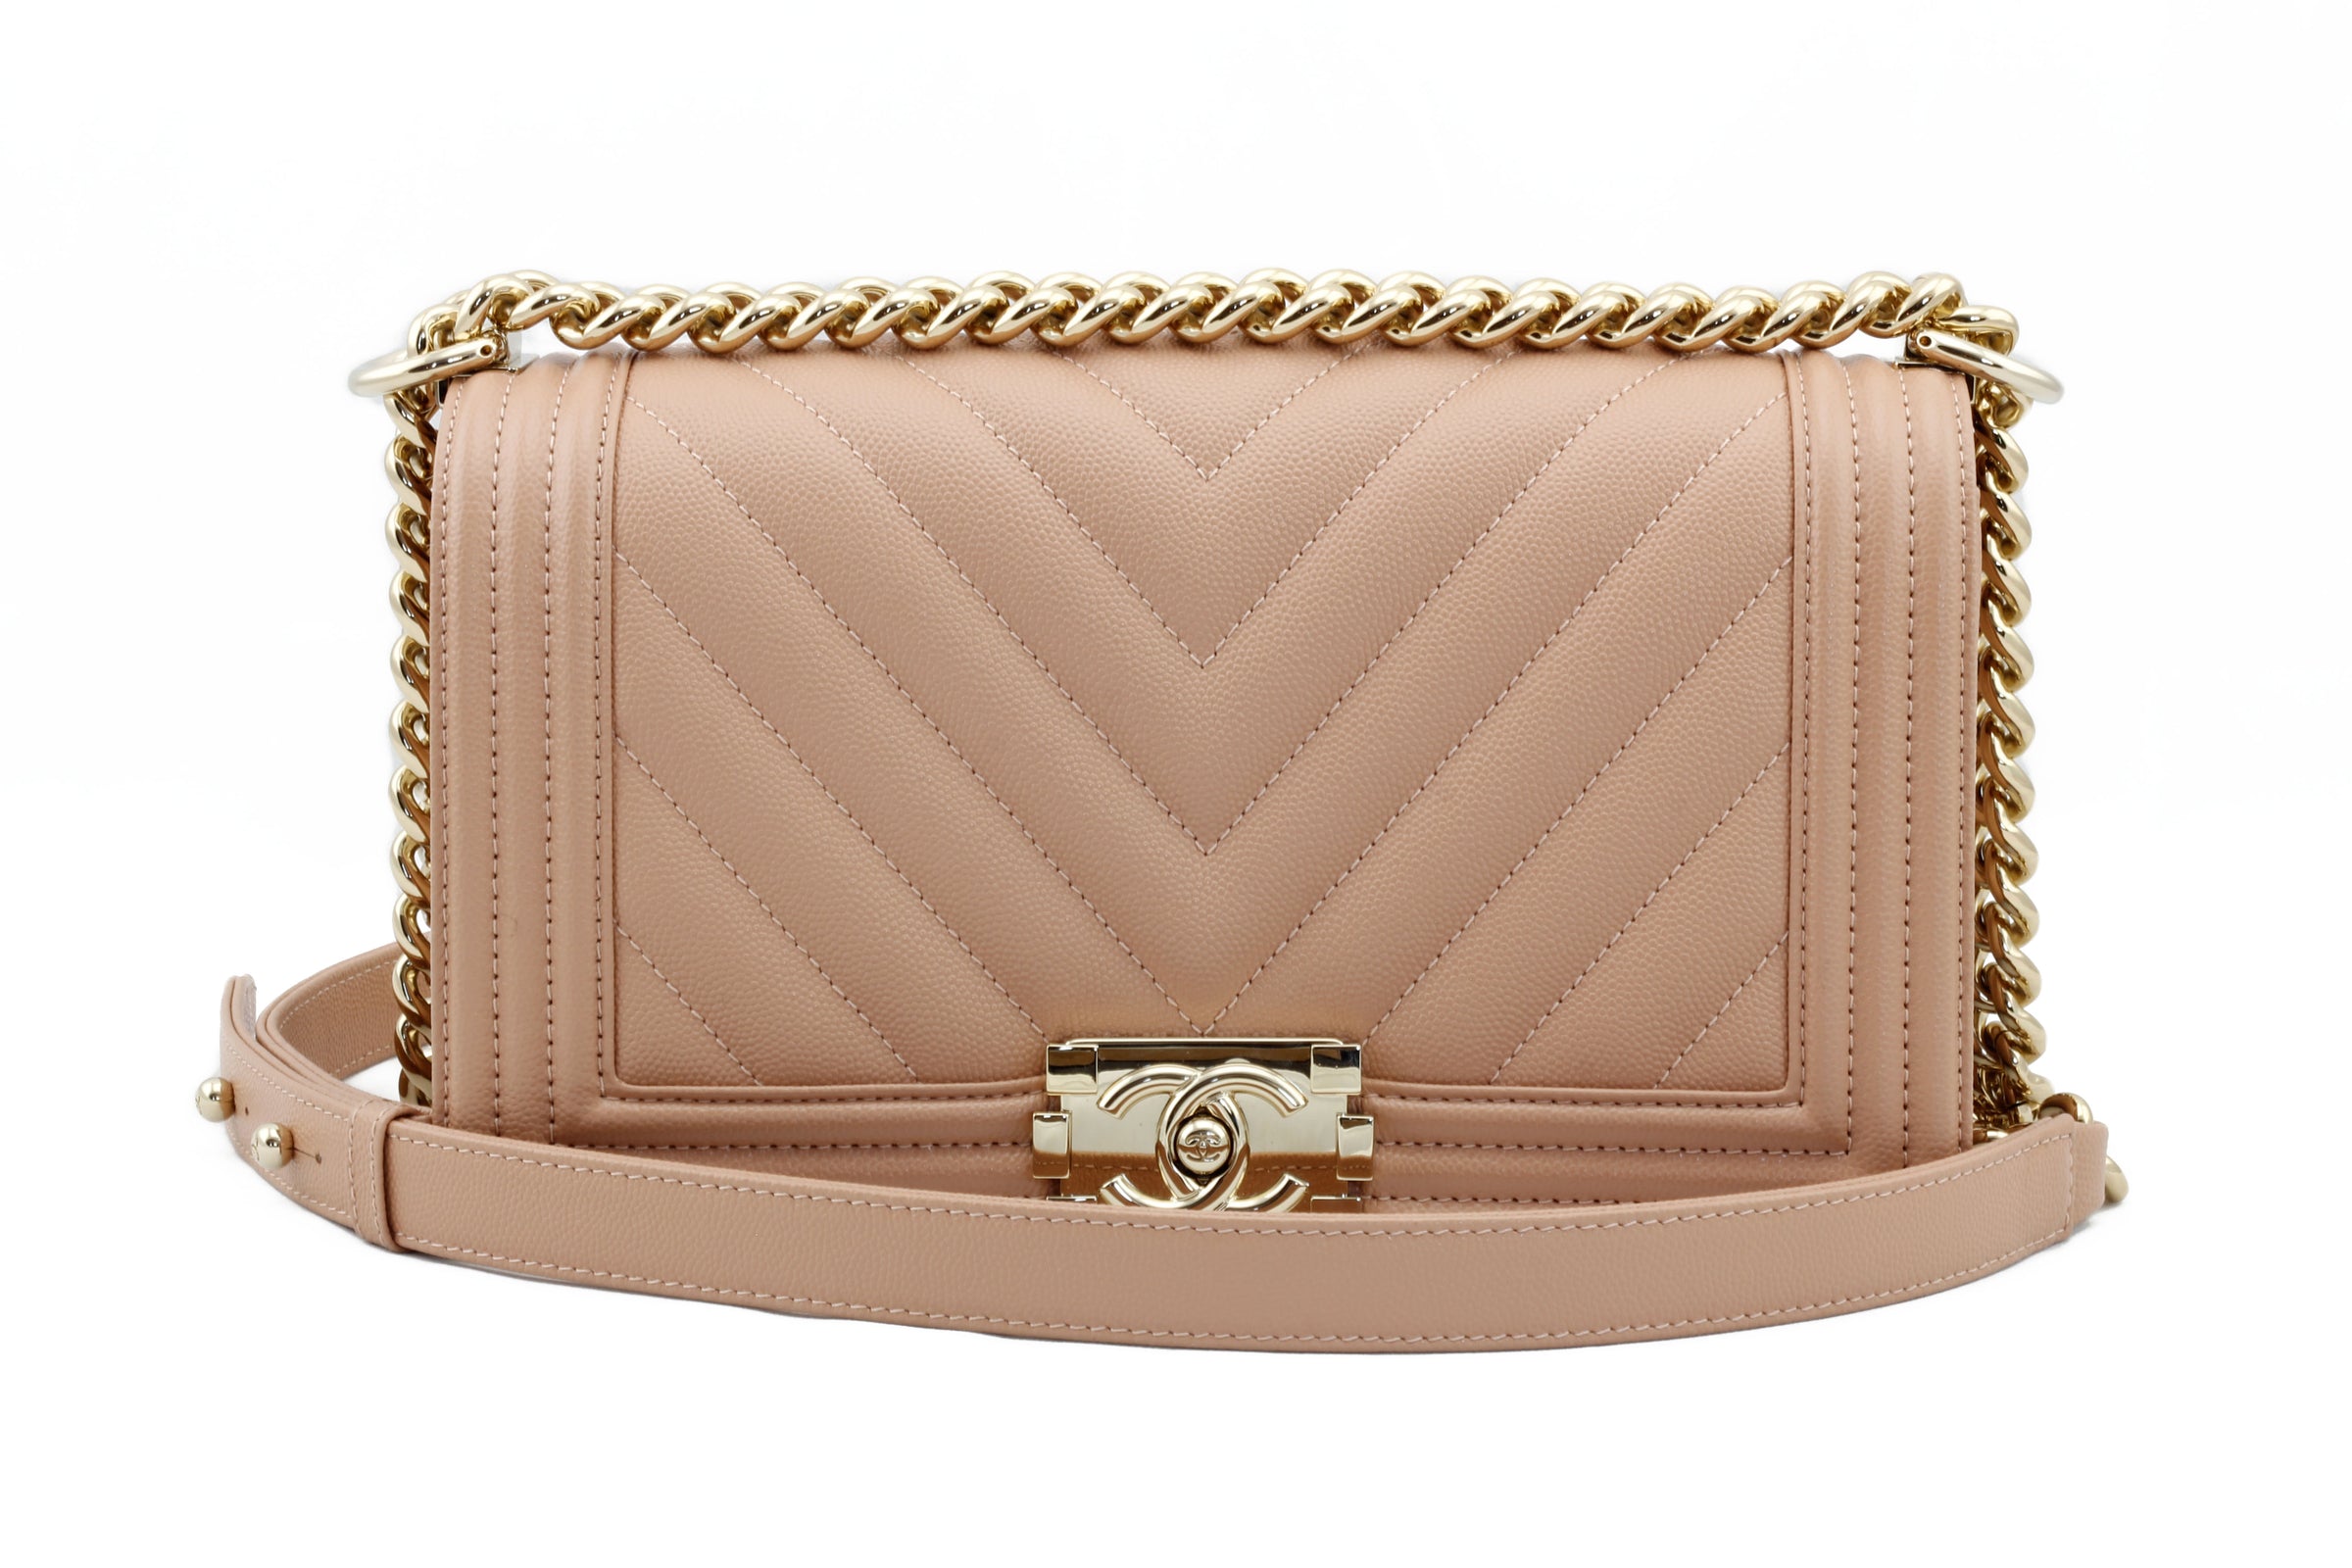 Chanel Coral Pink Grained Calfskin Small Boy Bag